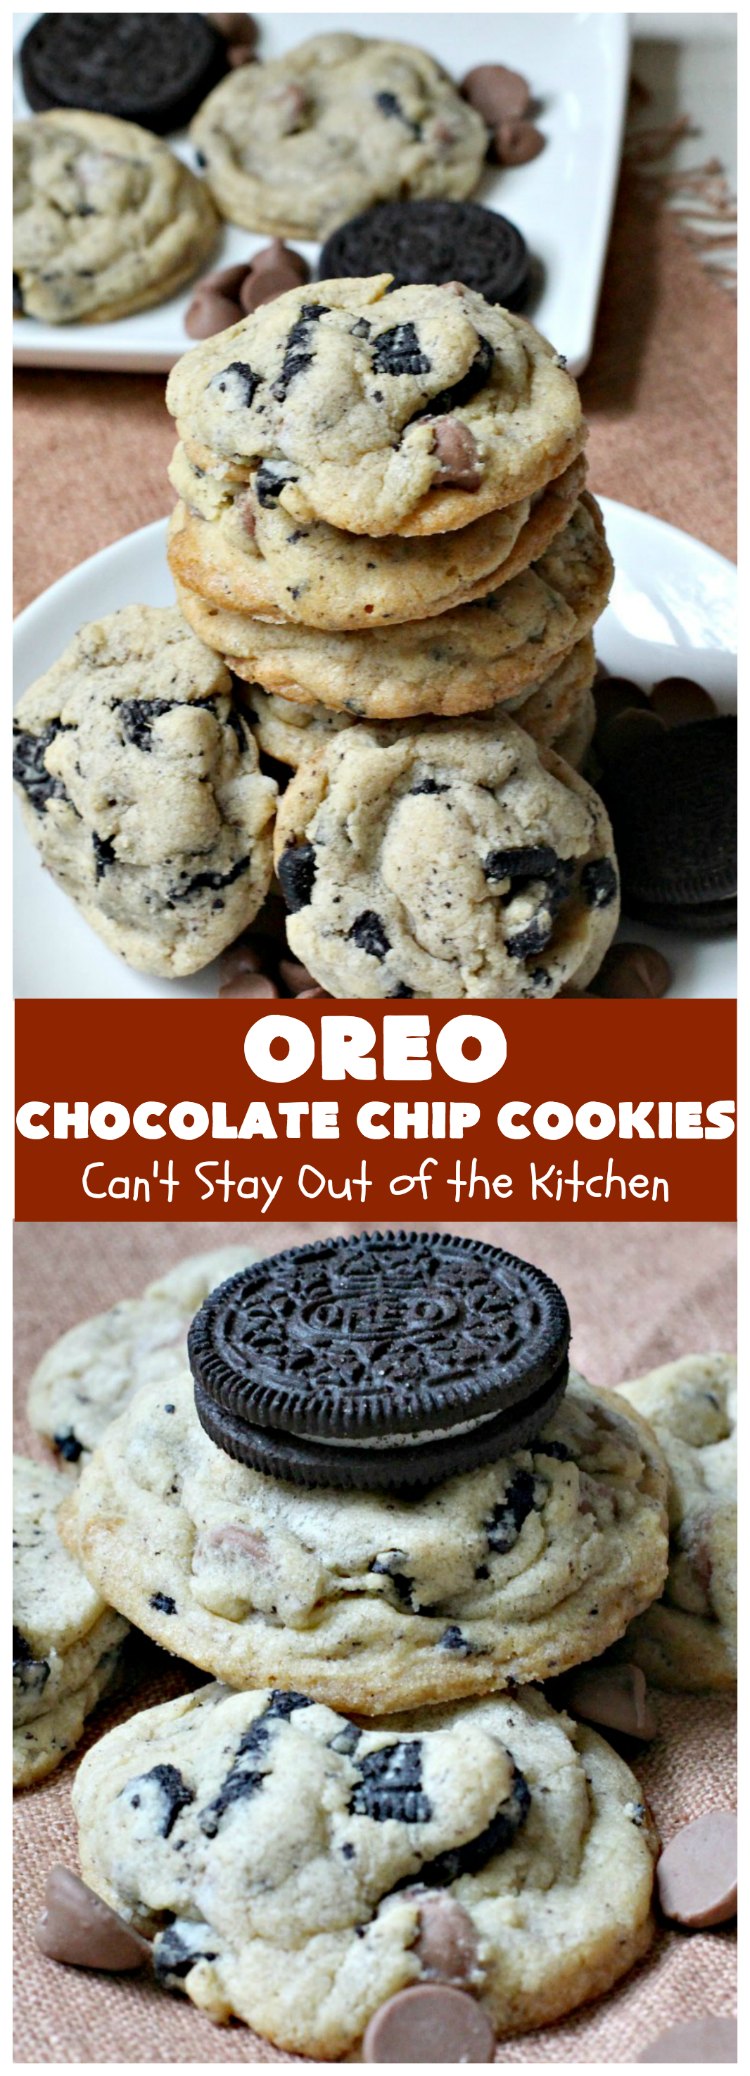 Oreo Chocolate Chip Cookies | Can't Stay Out of the Kitchen